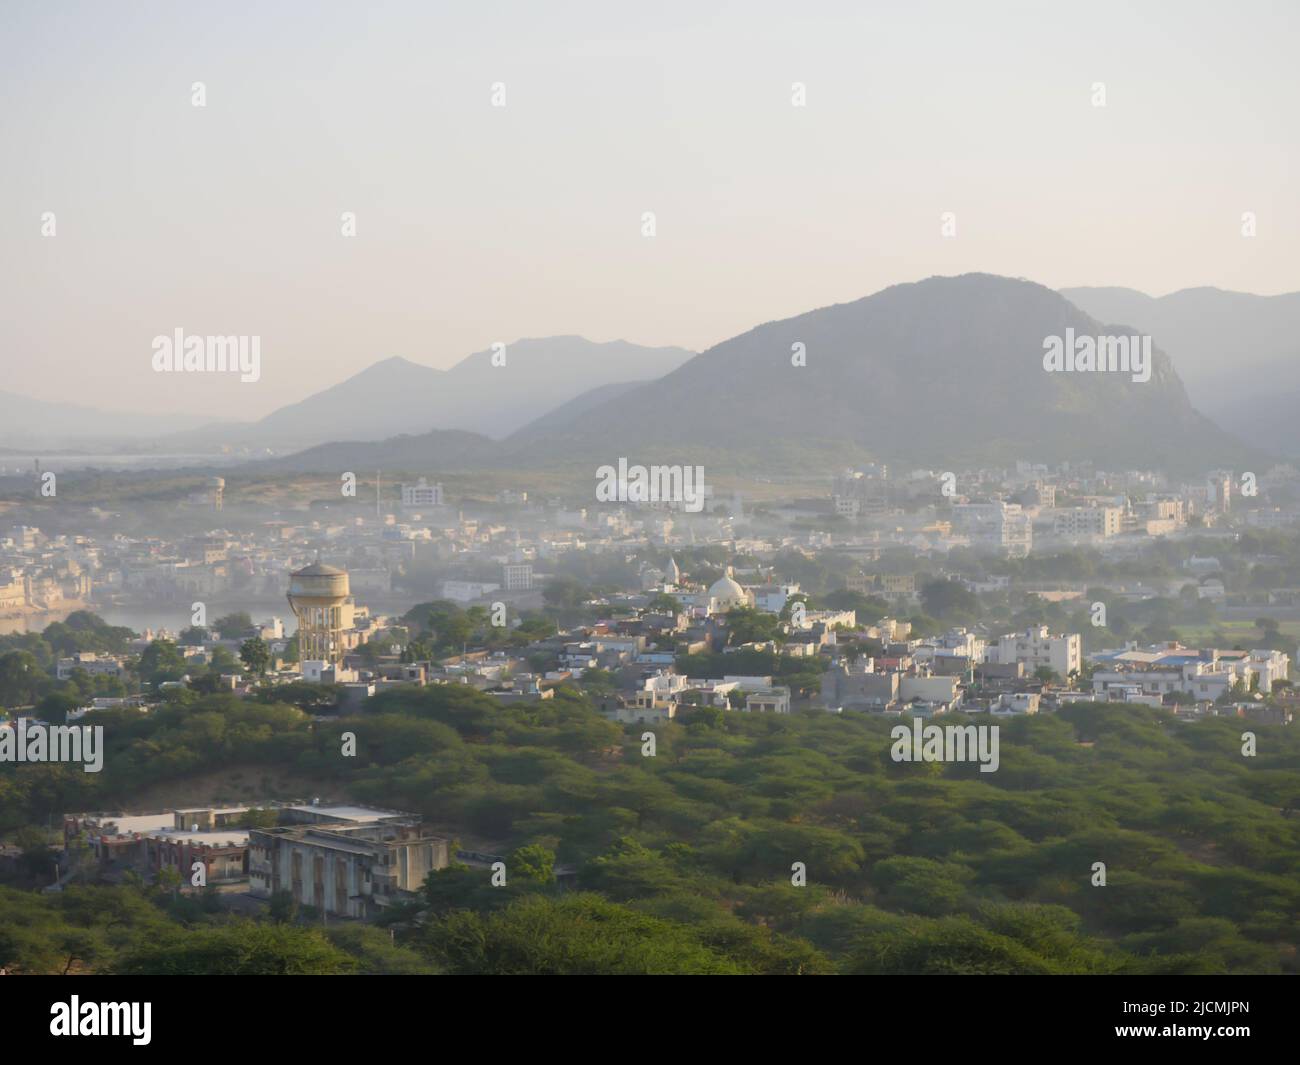 Pushkar City landscape Aerial View from Mountain Stock Photo